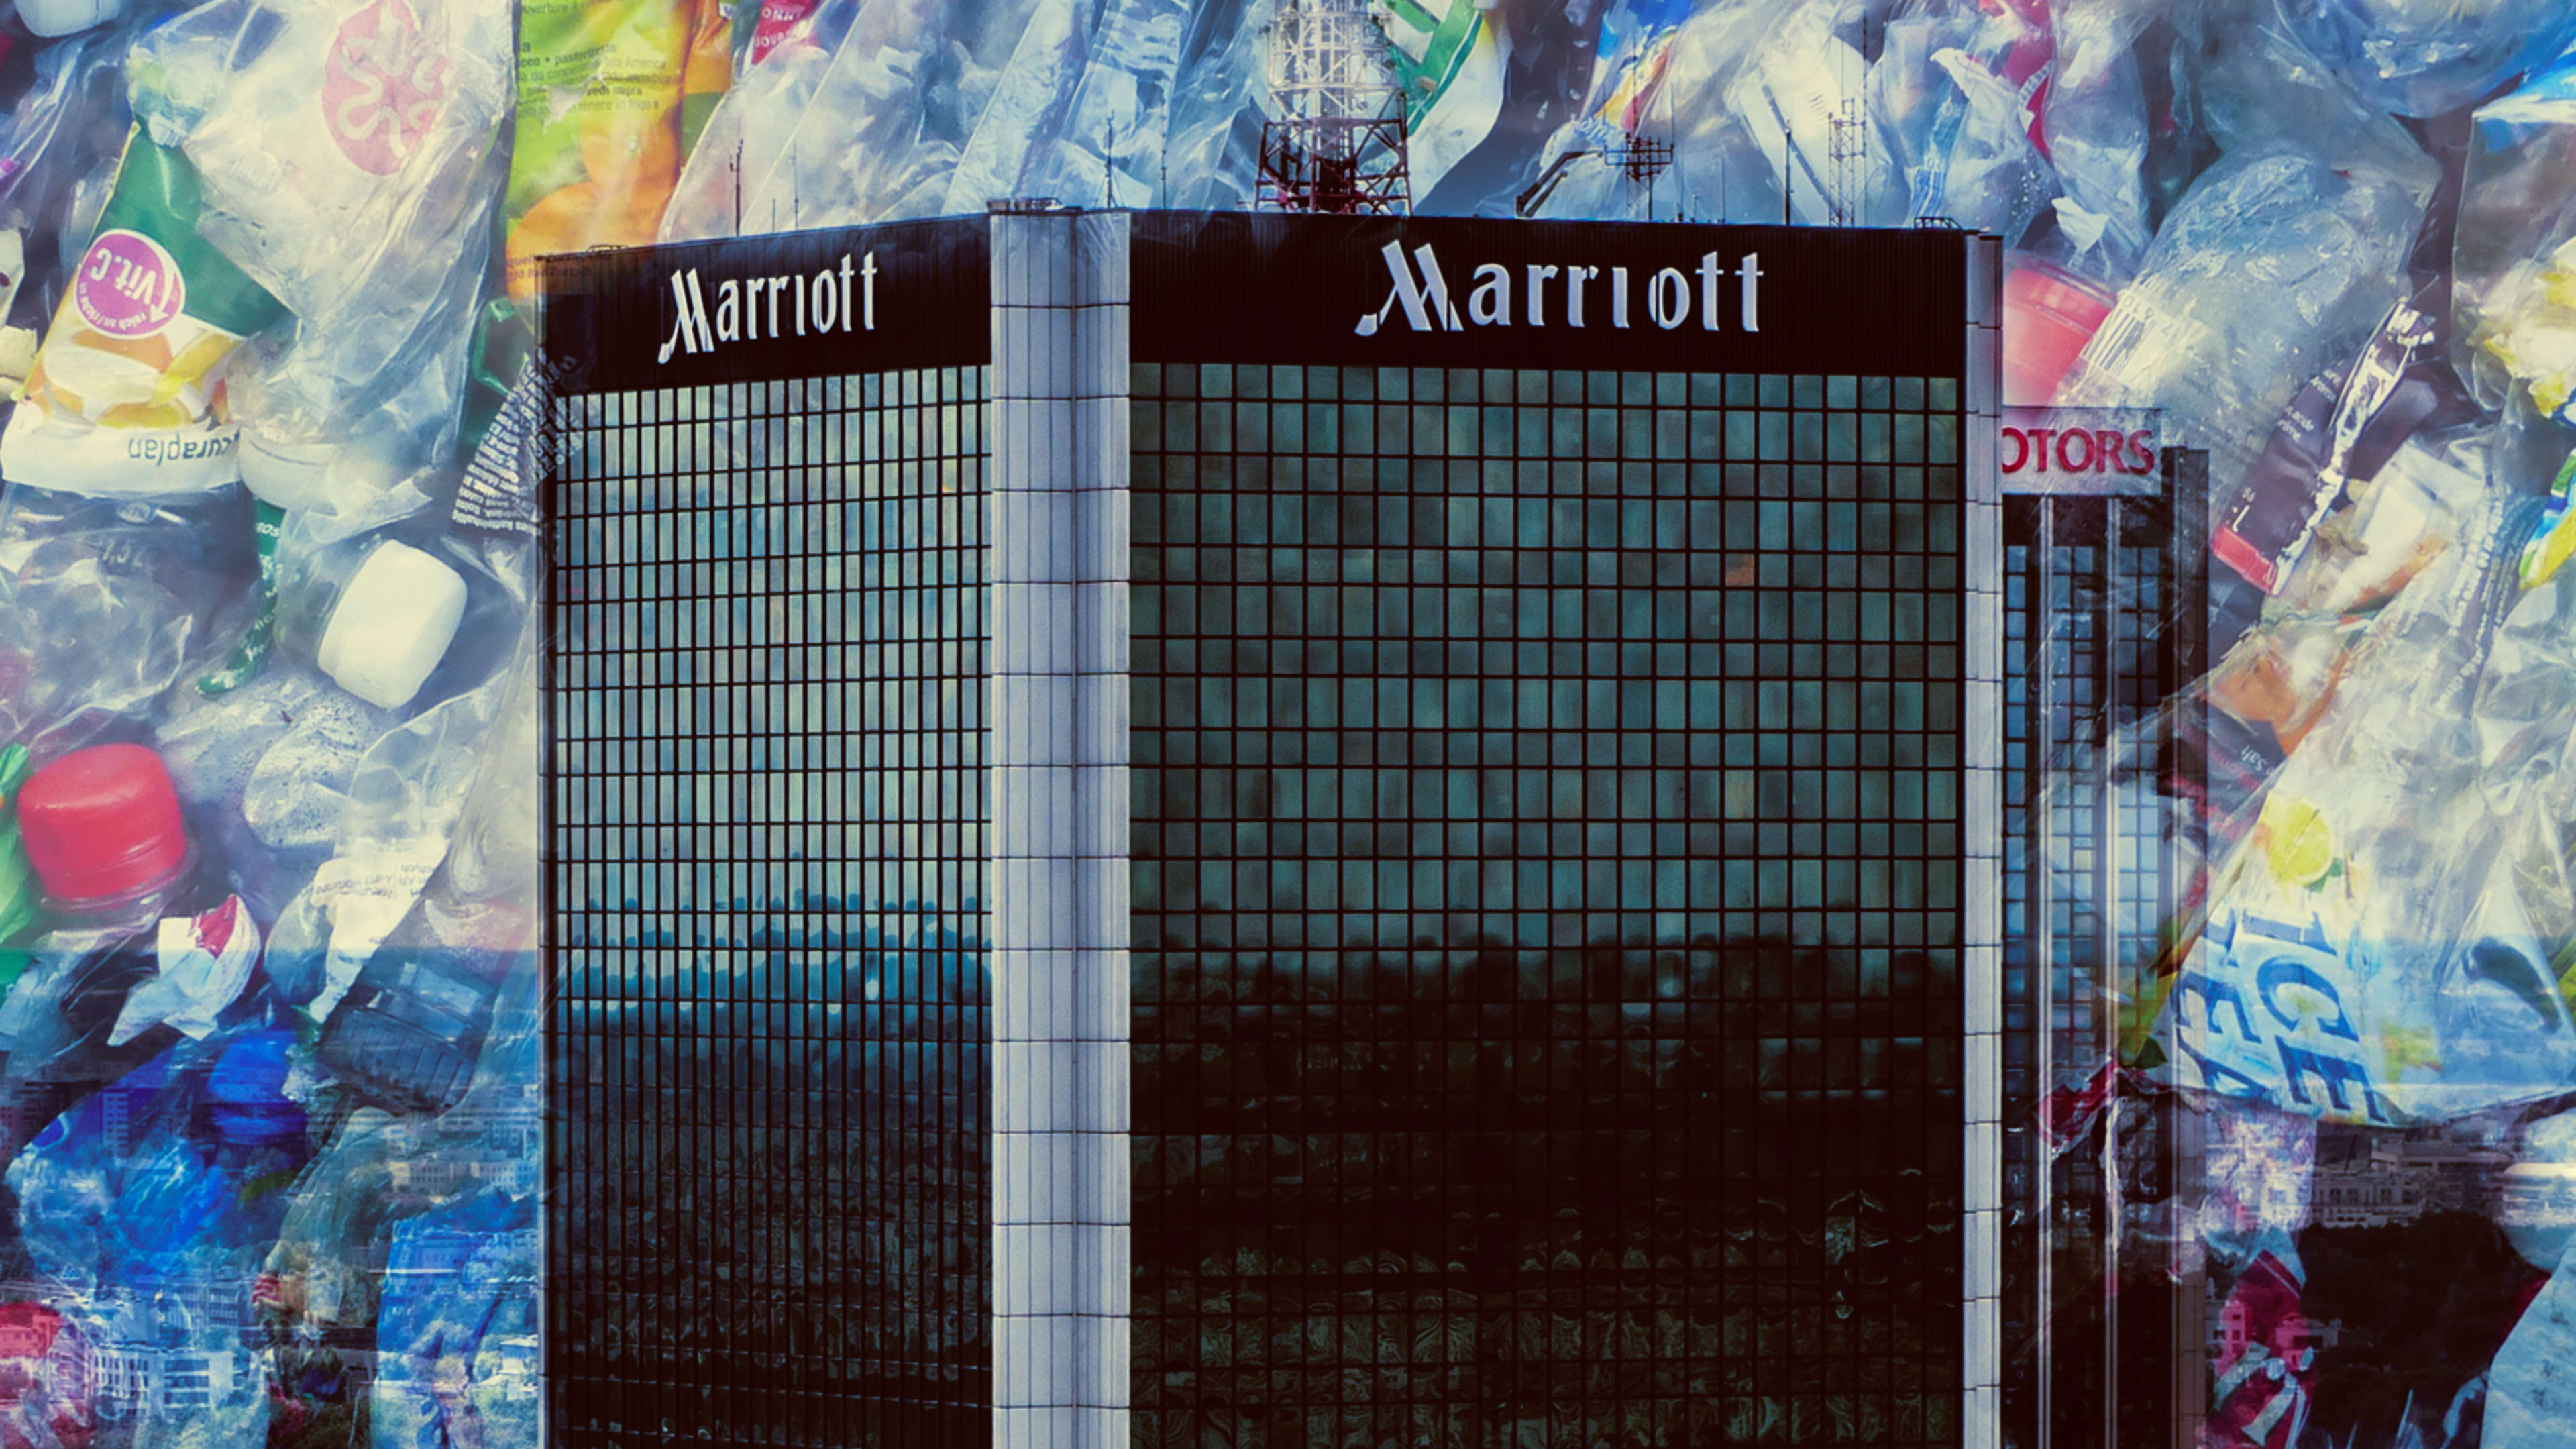 Marriott, the world’s largest hotel chain, just moved to eliminate 500 million small bottles